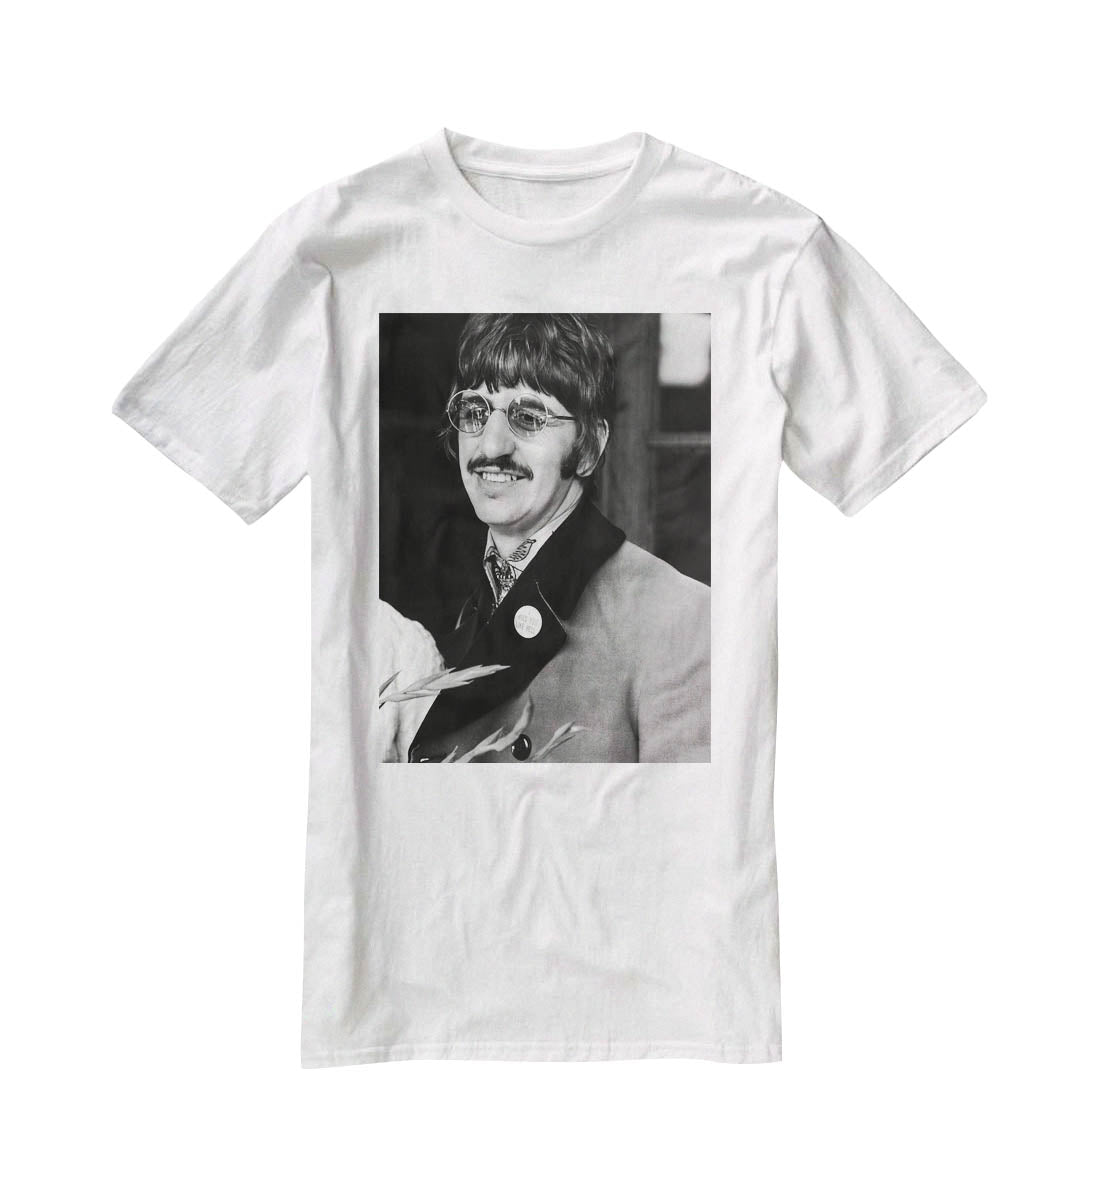 Ringo Starr of The Beatles in 1967 T-Shirt - Canvas Art Rocks - 5